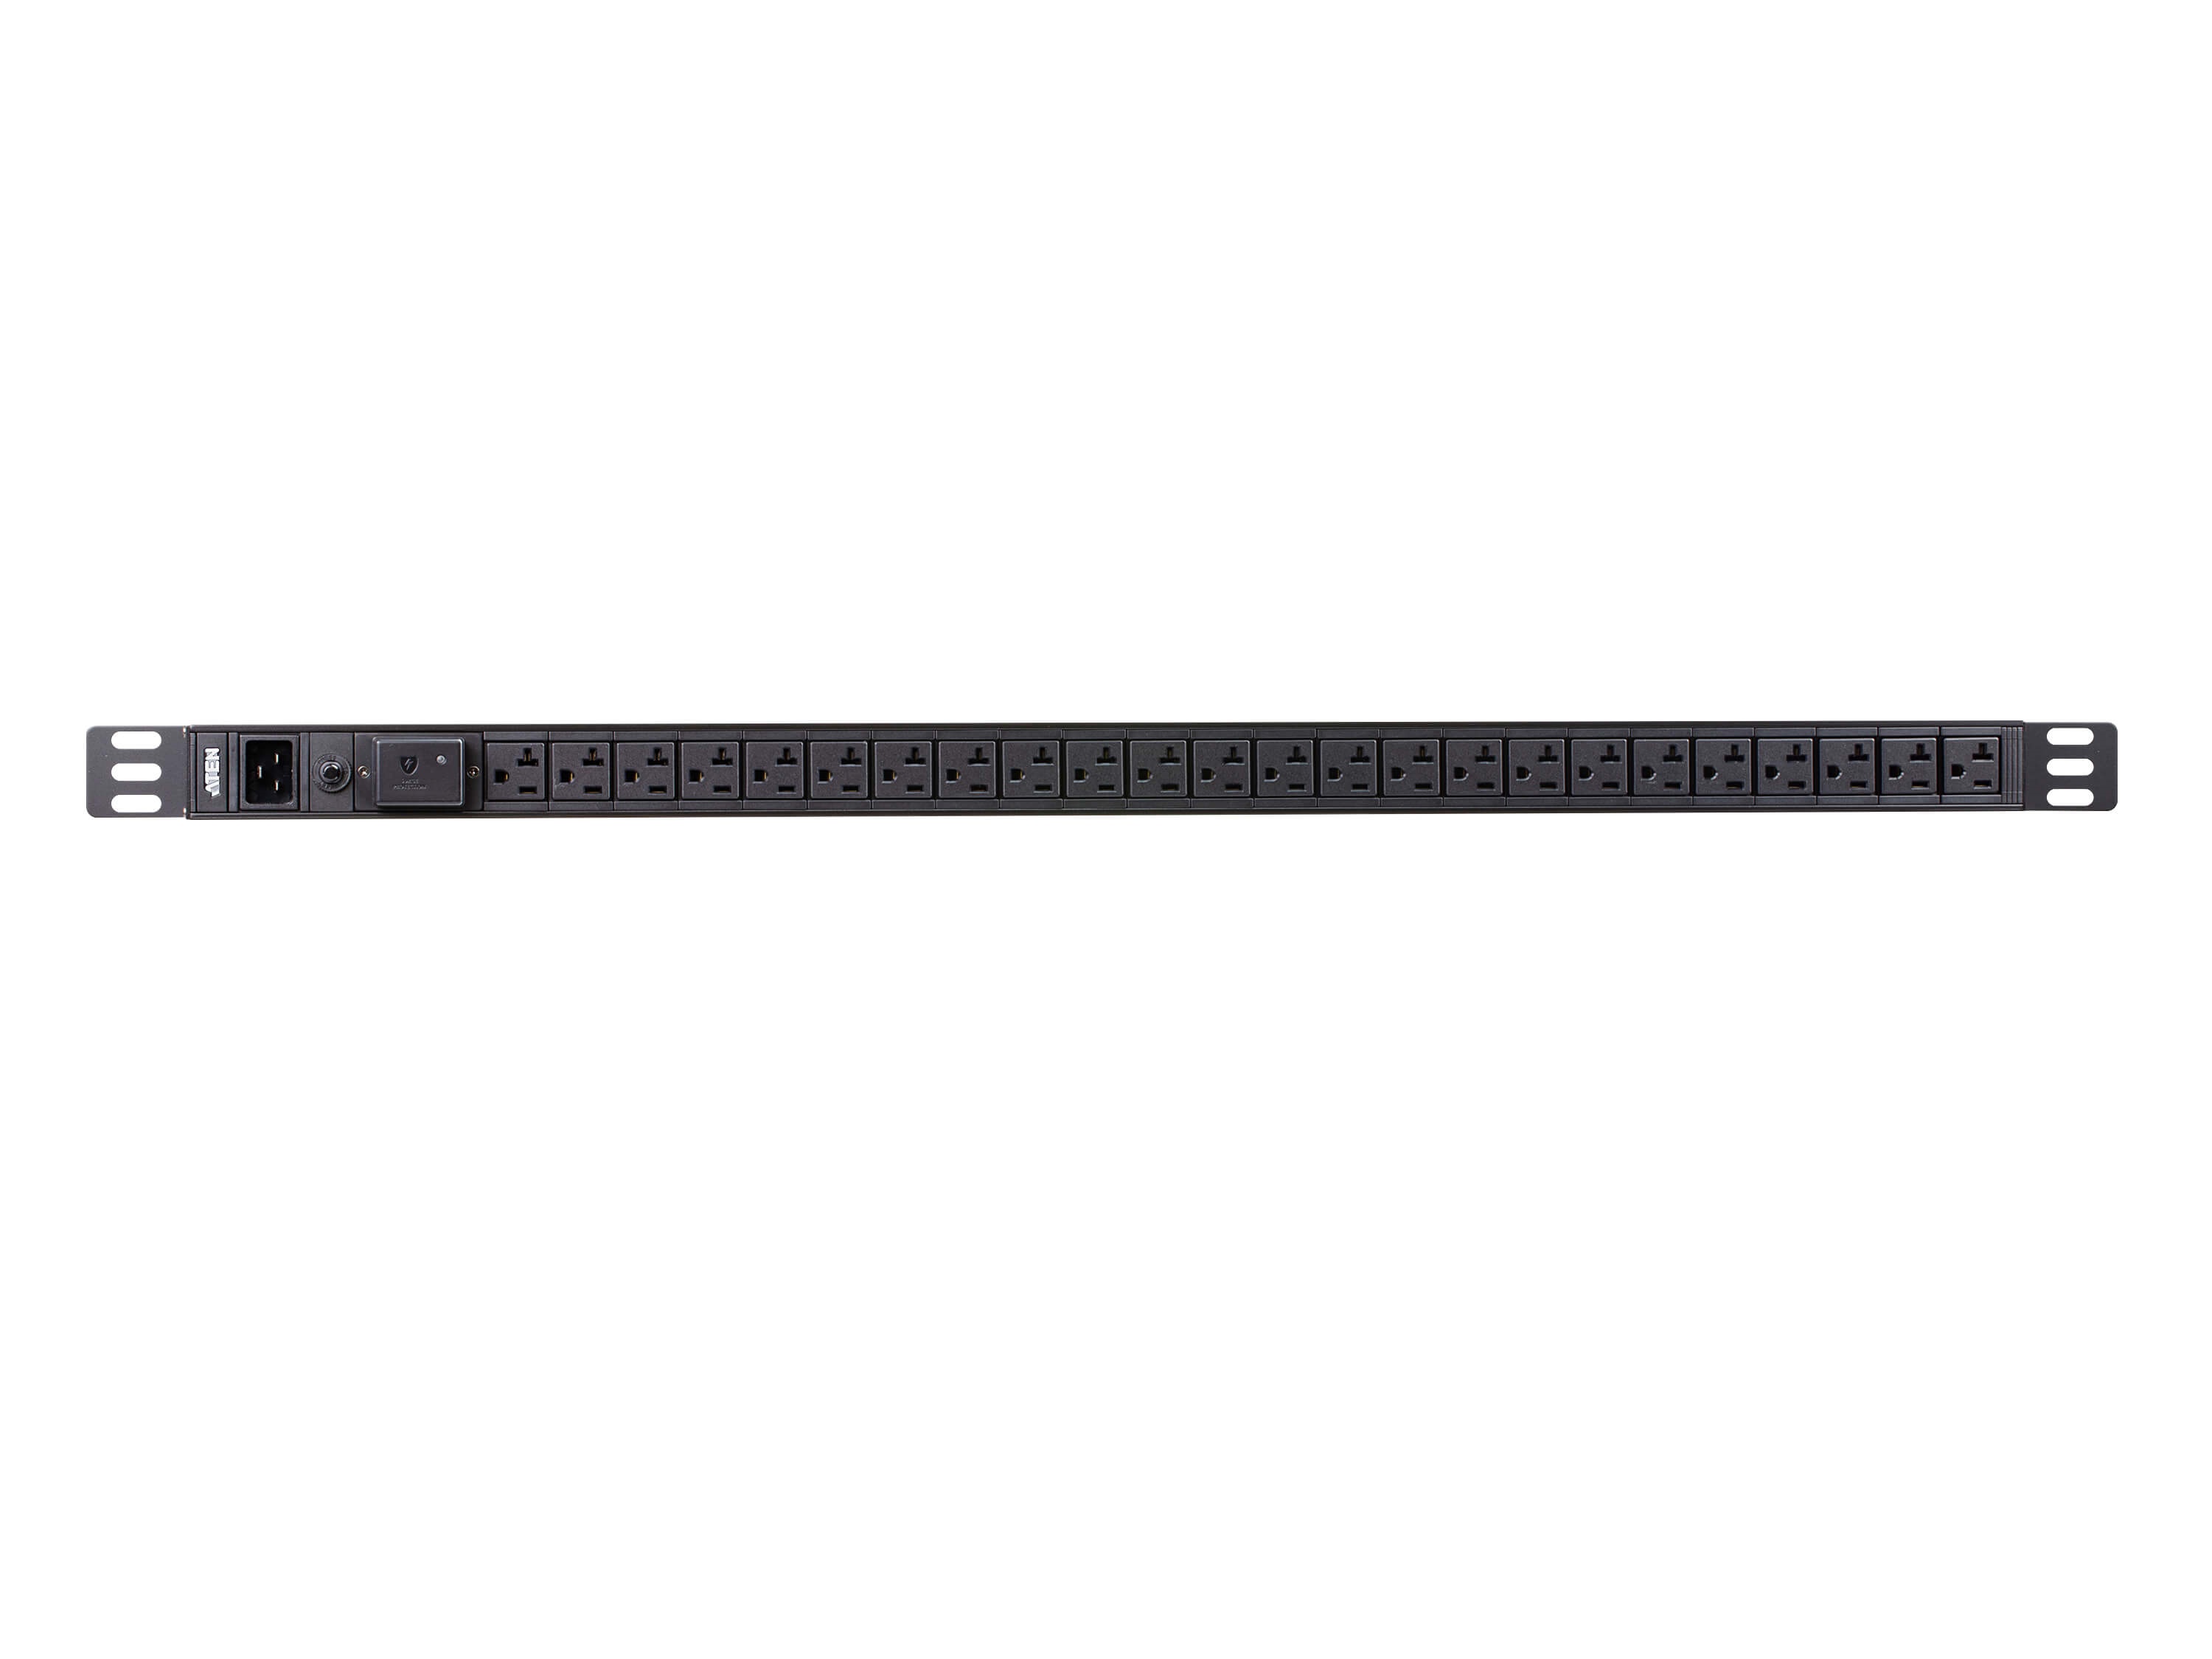 PE0224SA Basic PDU with Surge Protection/100-120 VAC/20A Max by Aten